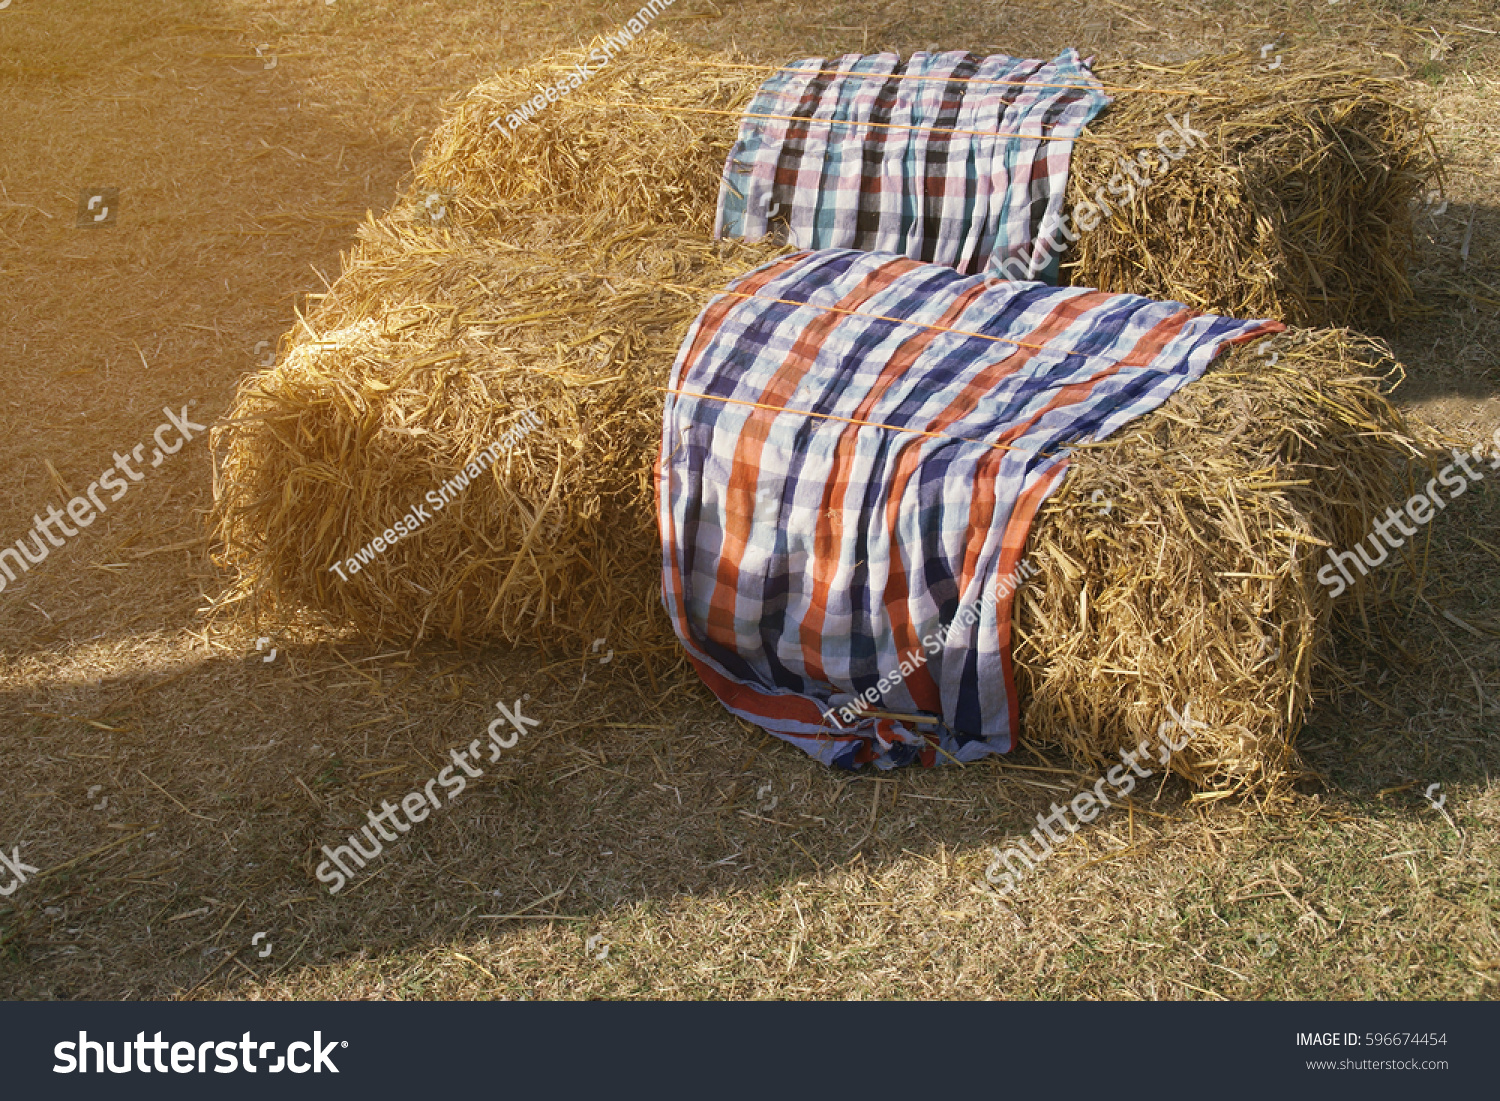 Hay Bale Seats Colorful Cloth Covers Stock Photo Edit Now